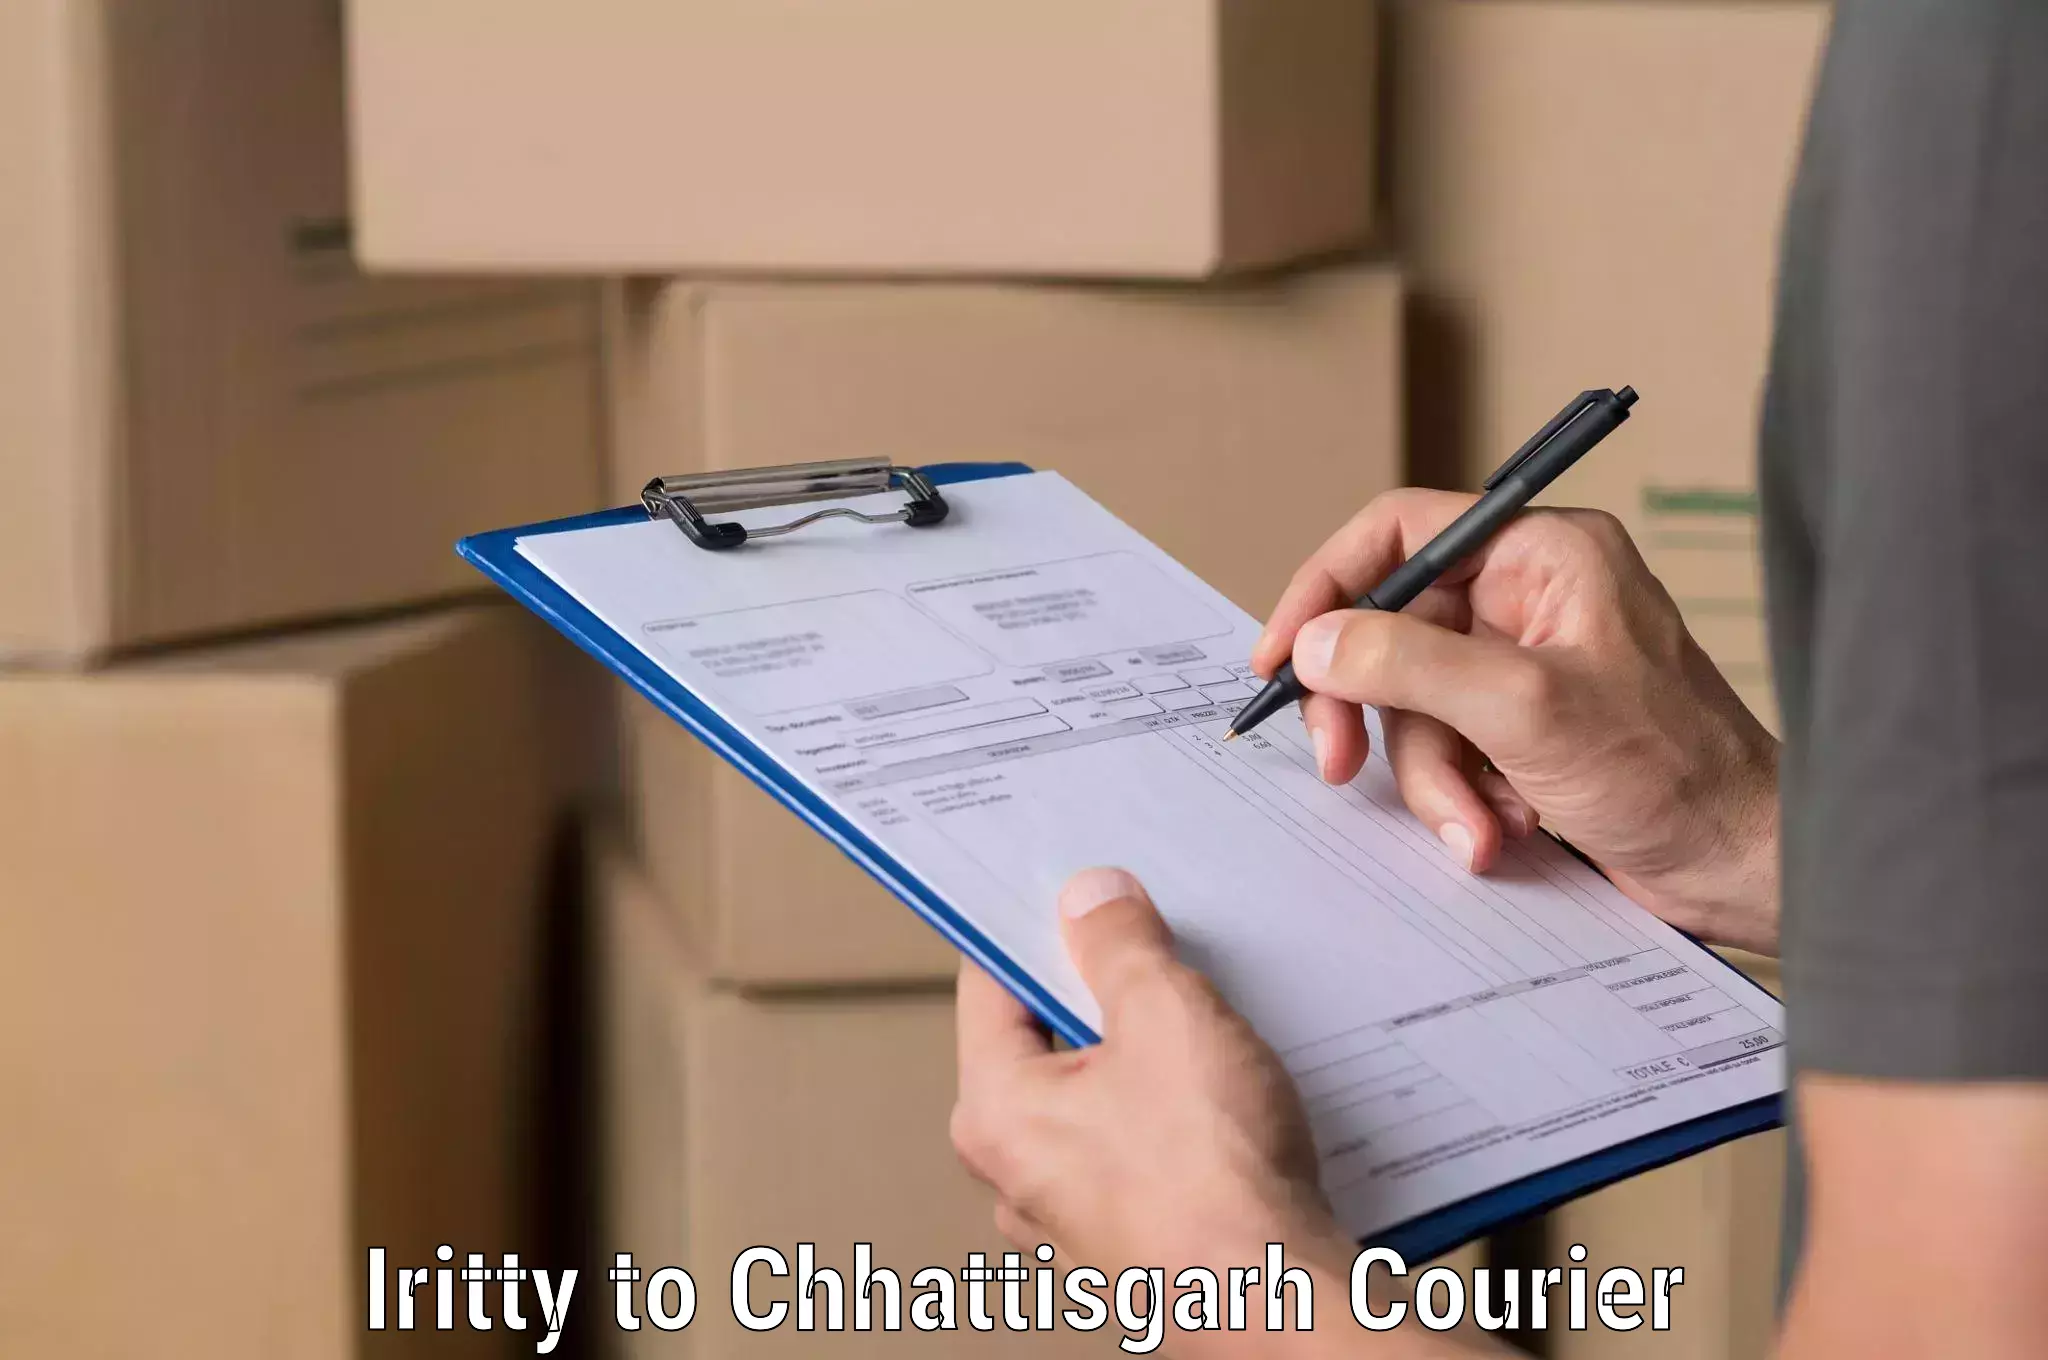 Specialized courier services Iritty to Chhattisgarh